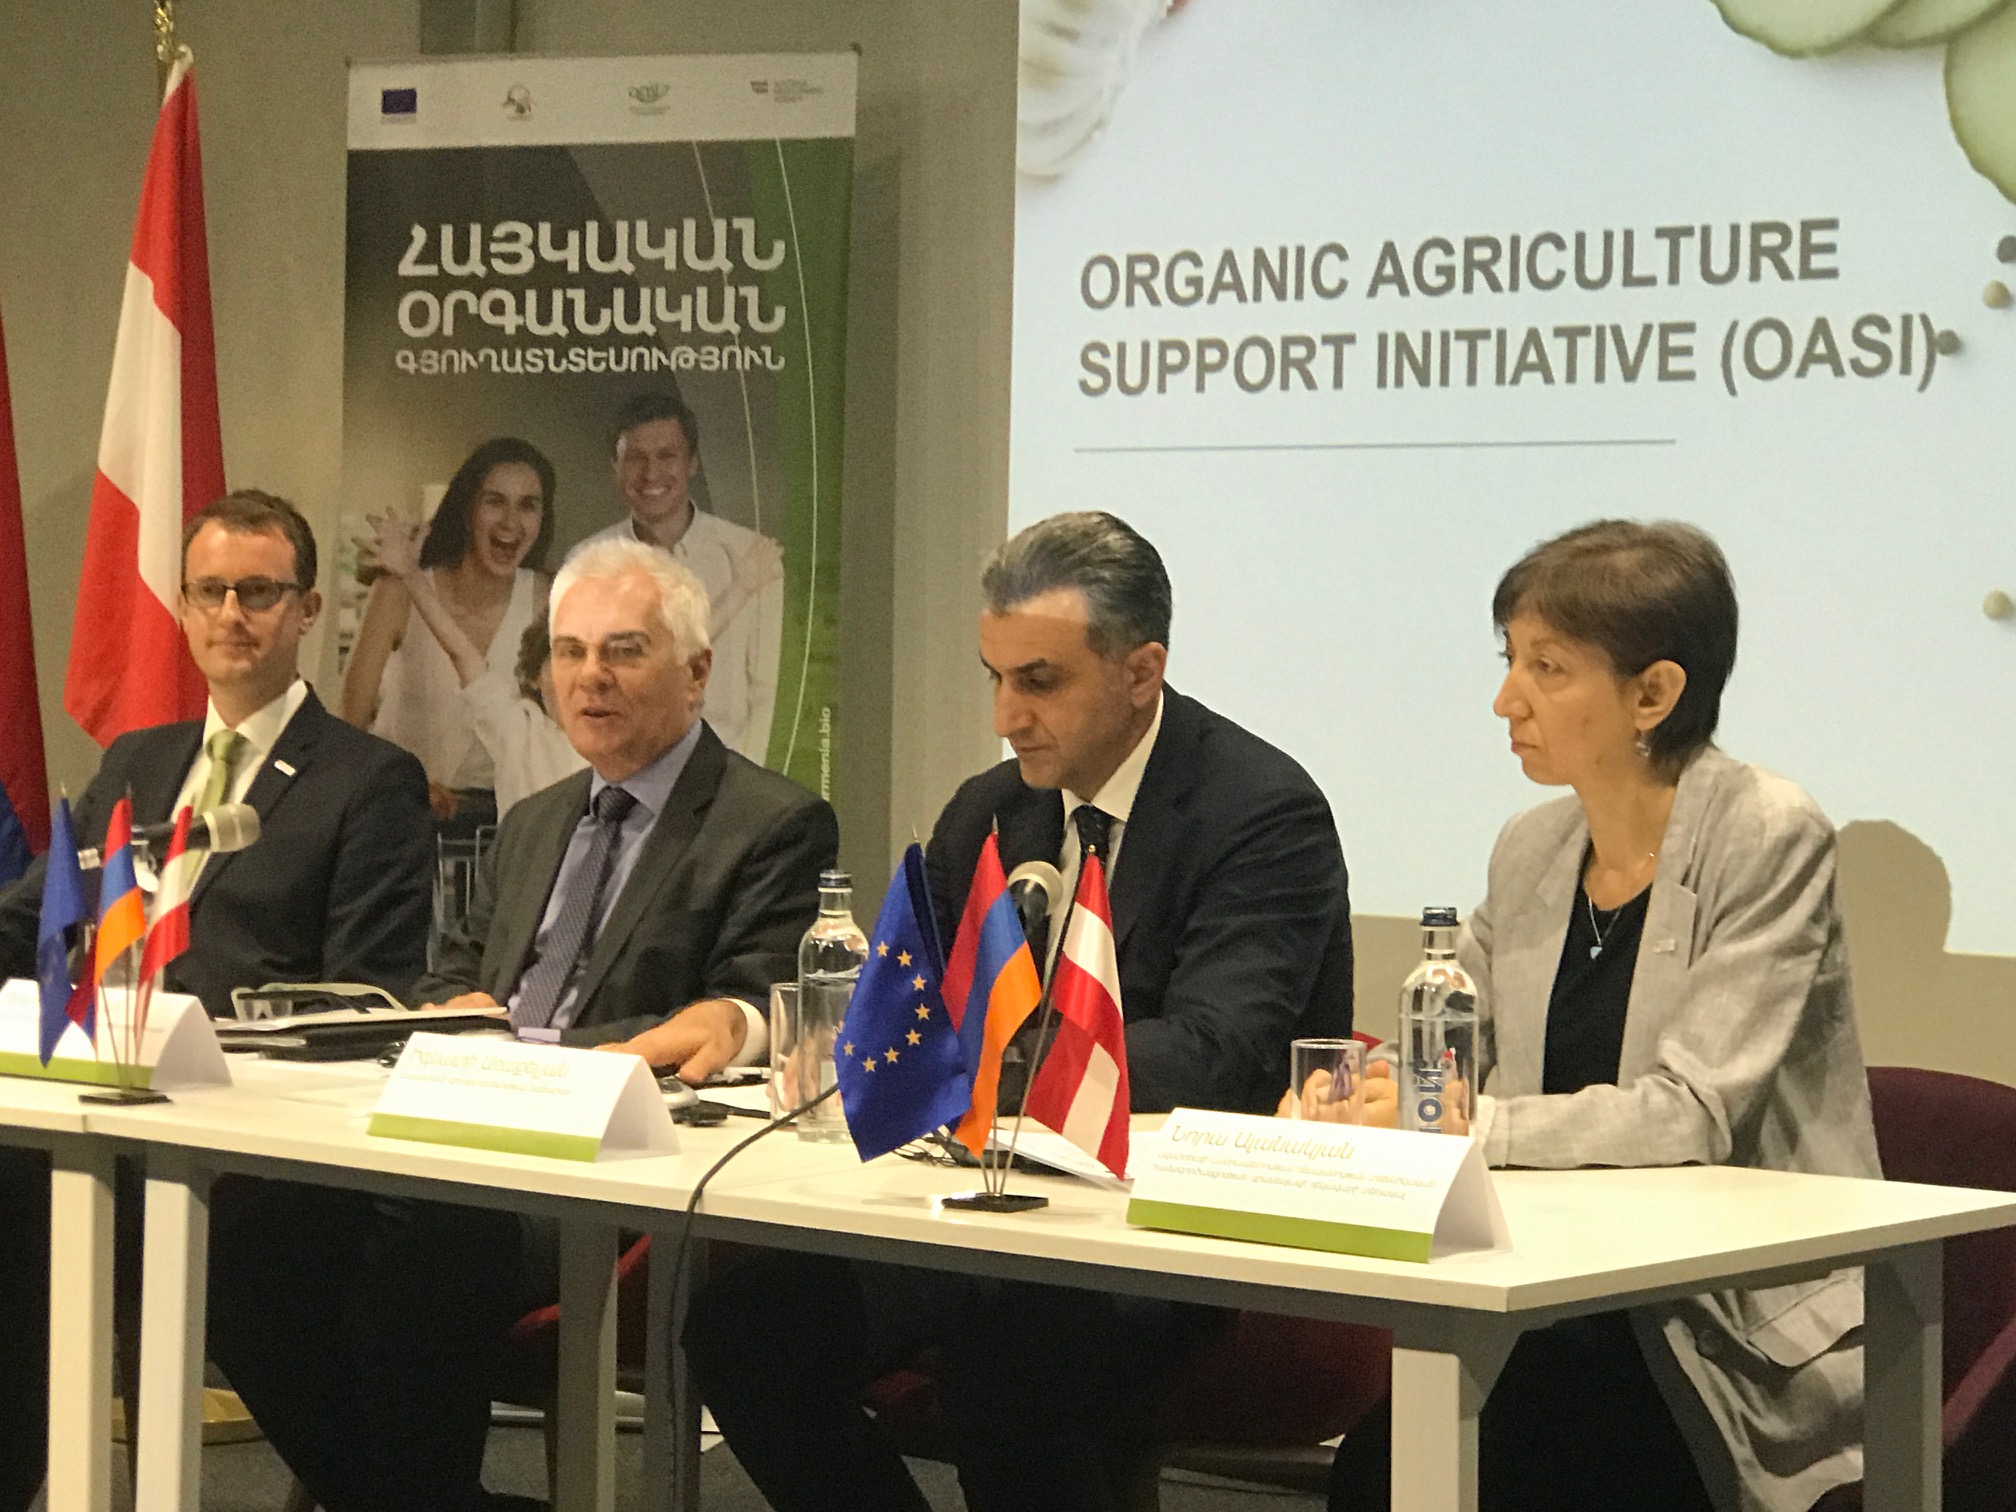 The EU sees great prospects for Armenian organic agricultural products in the European market